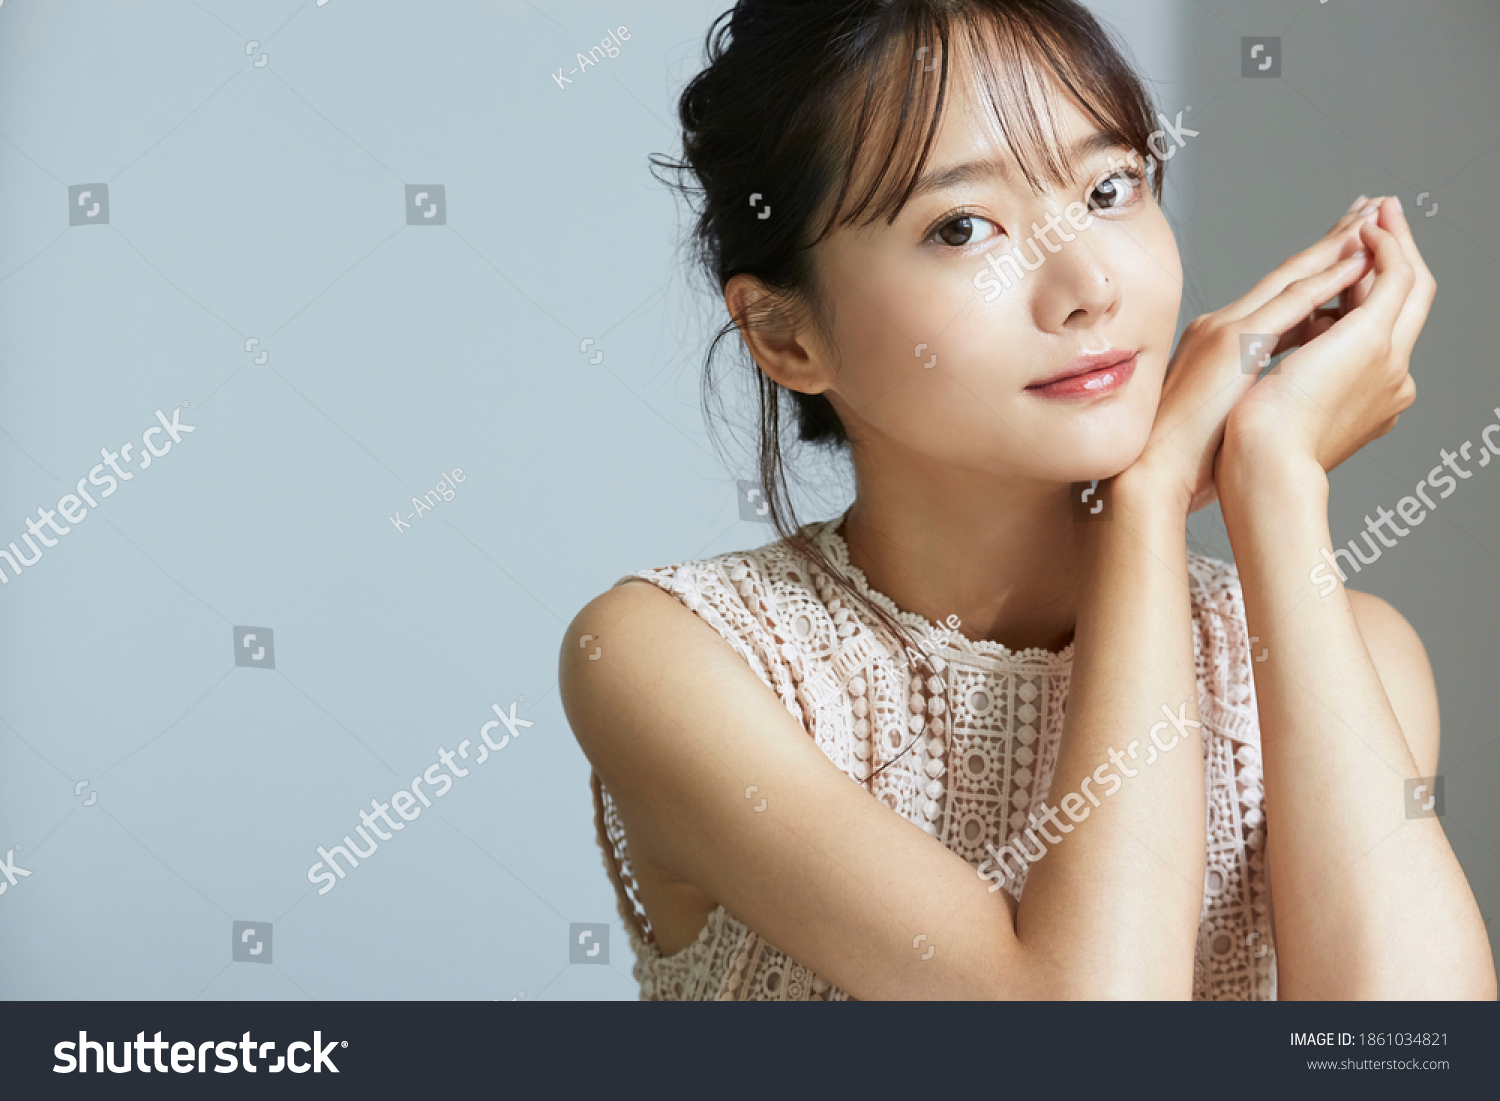 Natural beauty portrait of young Asian woman #1861034821